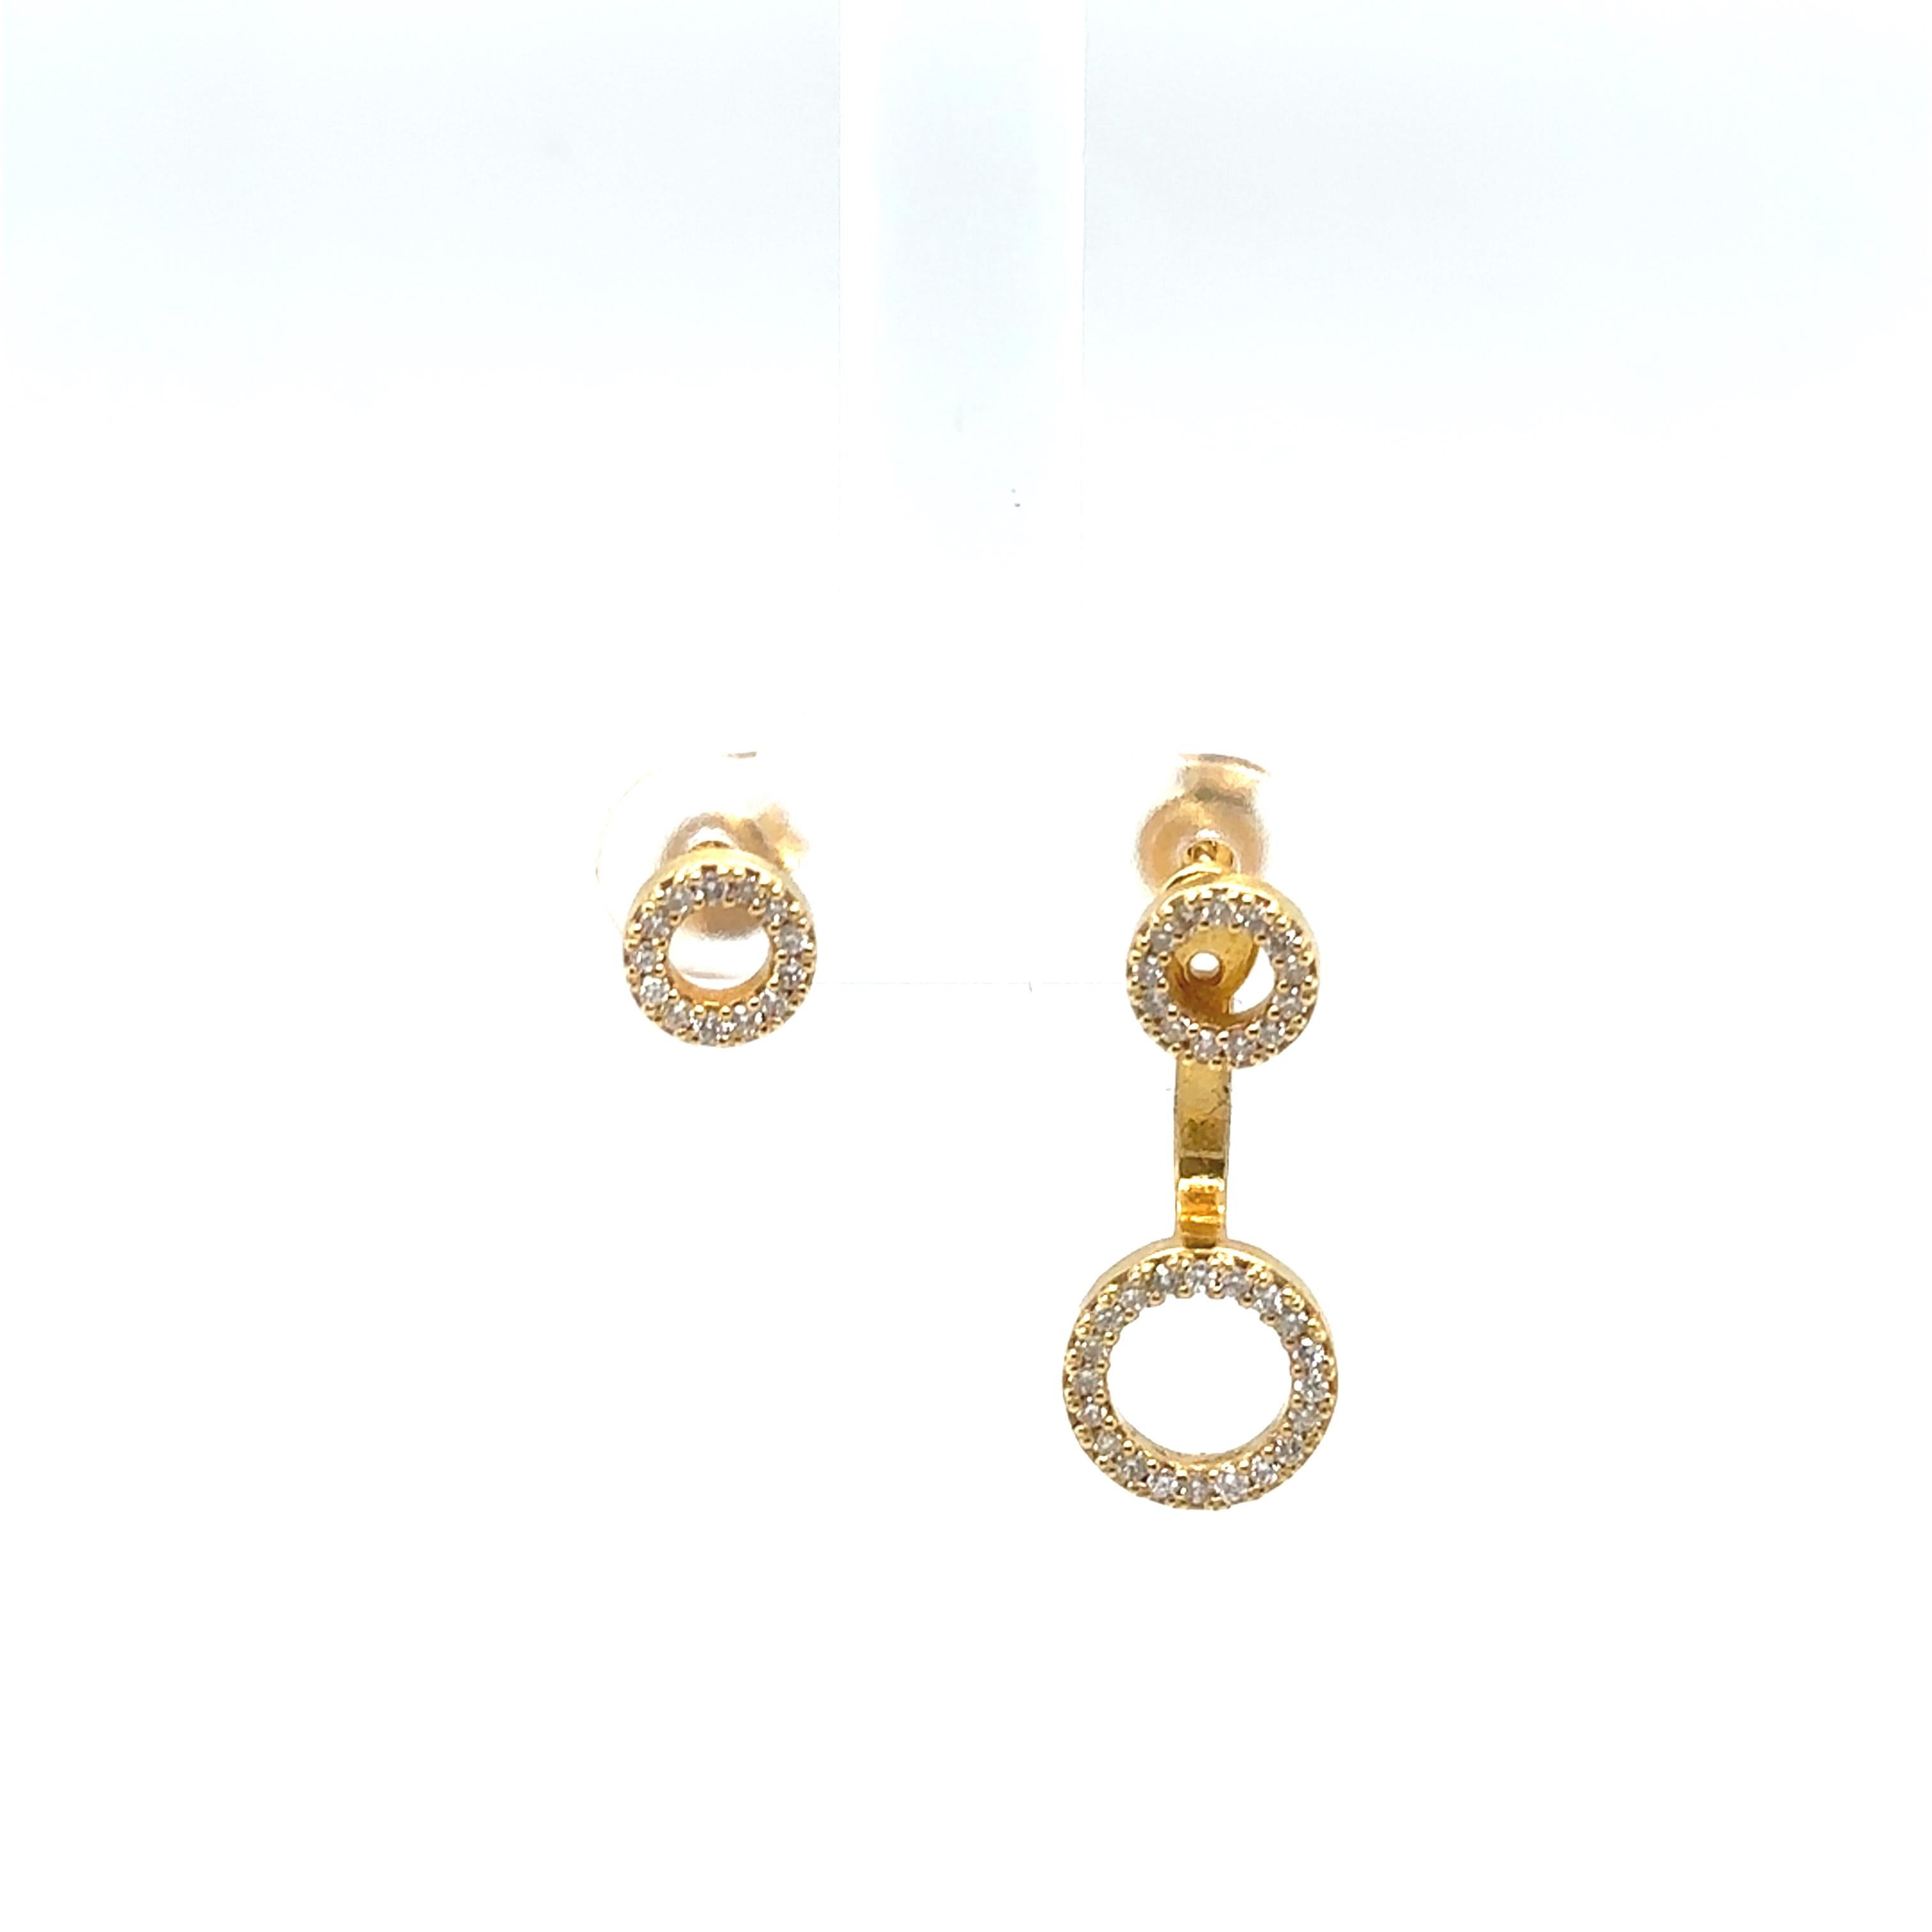 New Fine Quality Drops & Studs Earring with Diamonds in 18ct Yellow Gold In New Condition For Sale In London, GB